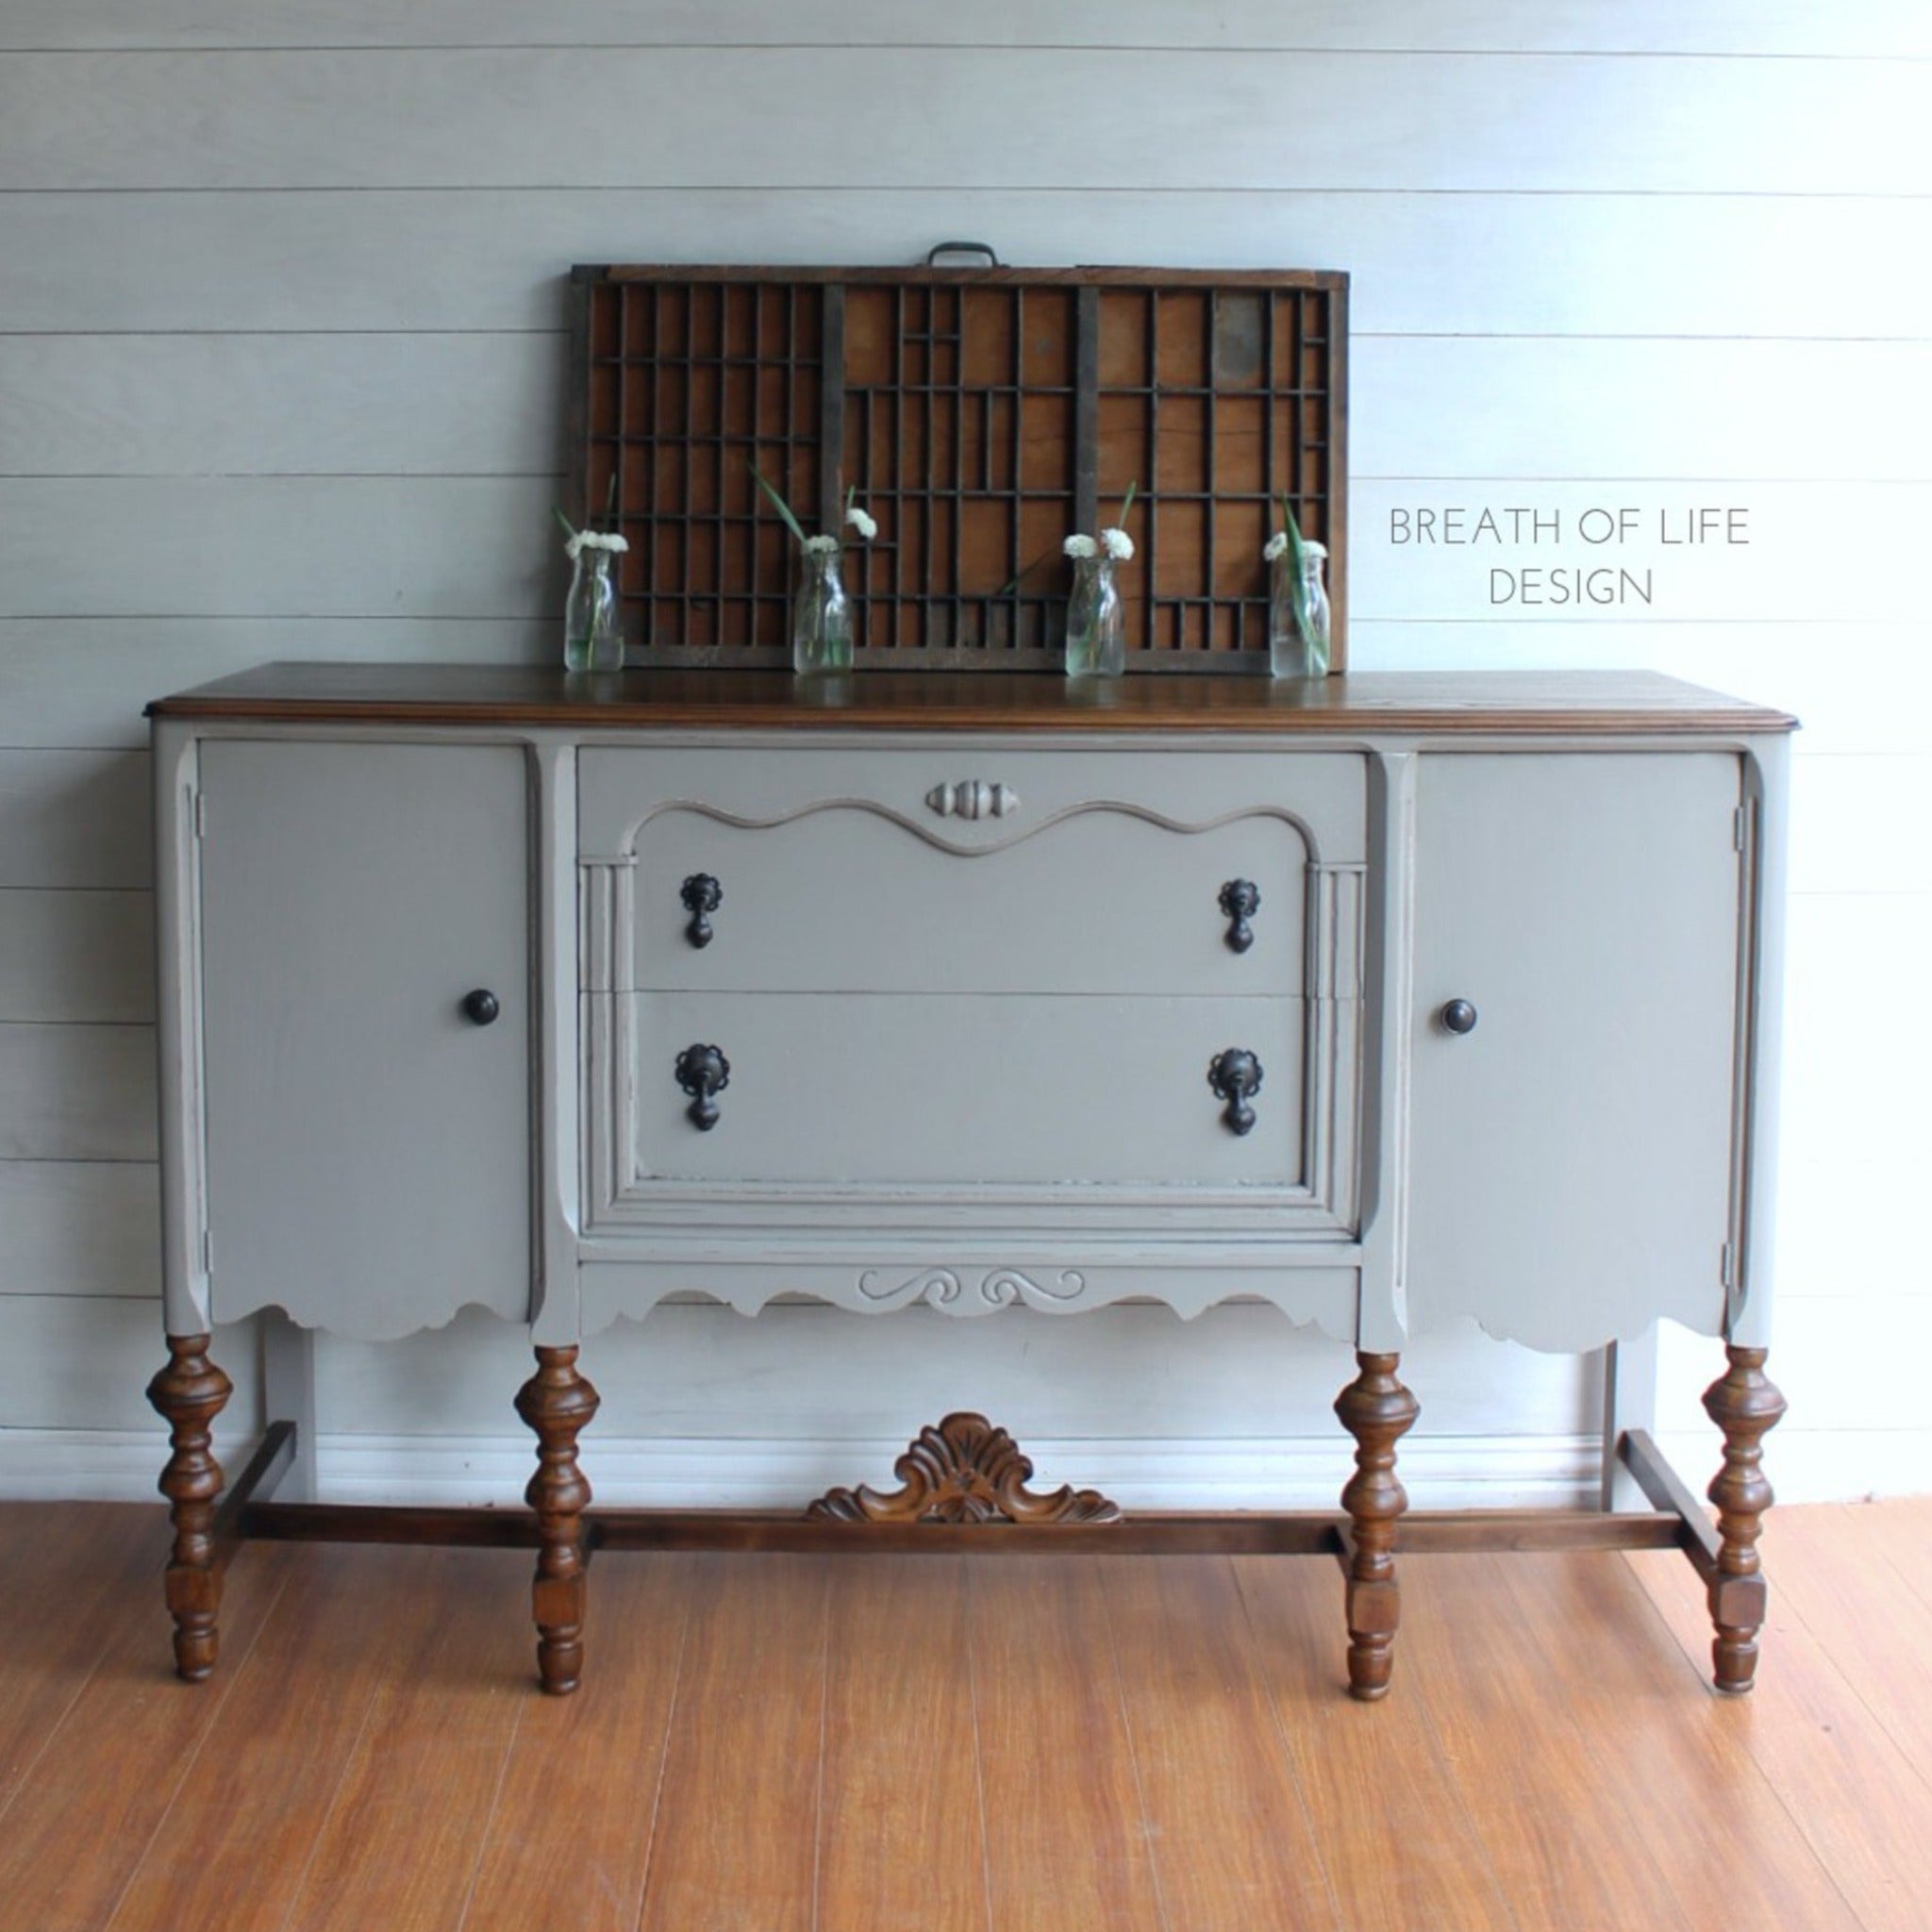 A vintage buffet console refurbished by Breath of Life Design is painted in Dixie Belle's French Linen chalk mineral paint and has natural wood accents.